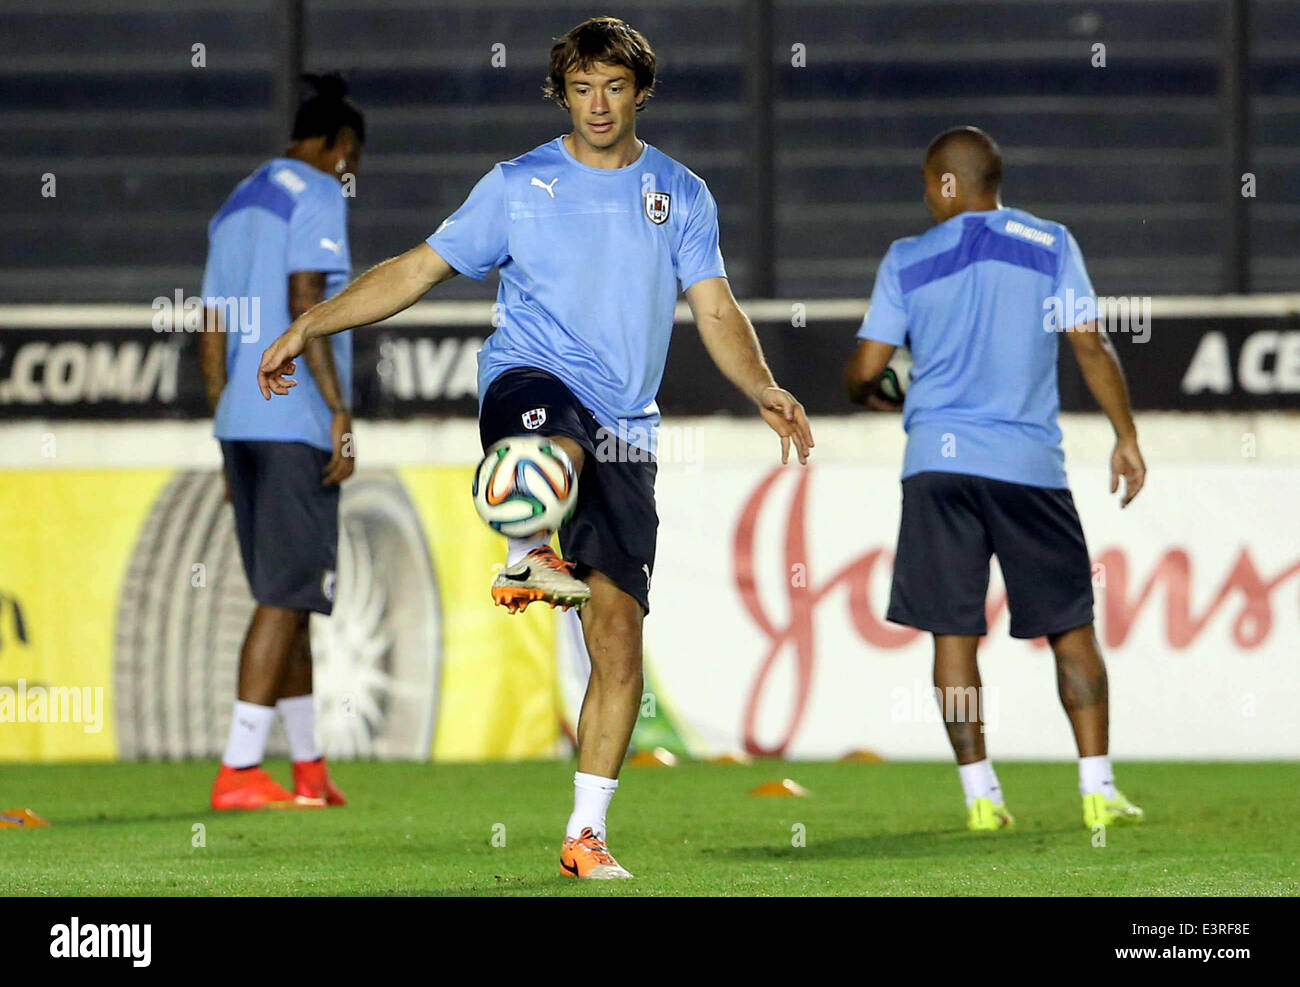 Rio De Janeiro, Brazil. 27th June, 2014. Uruguay's National Team player Diego Lugano (C) attends a training session in Rio de Janeiro, Brazil, on June 27, 2014. Uruguay will face Colombia next Saturday during the Round of 16 of 2014 FIFA World Cup Brazil. © Juan Roleri/TELAM/Xinhua/Alamy Live News Stock Photo